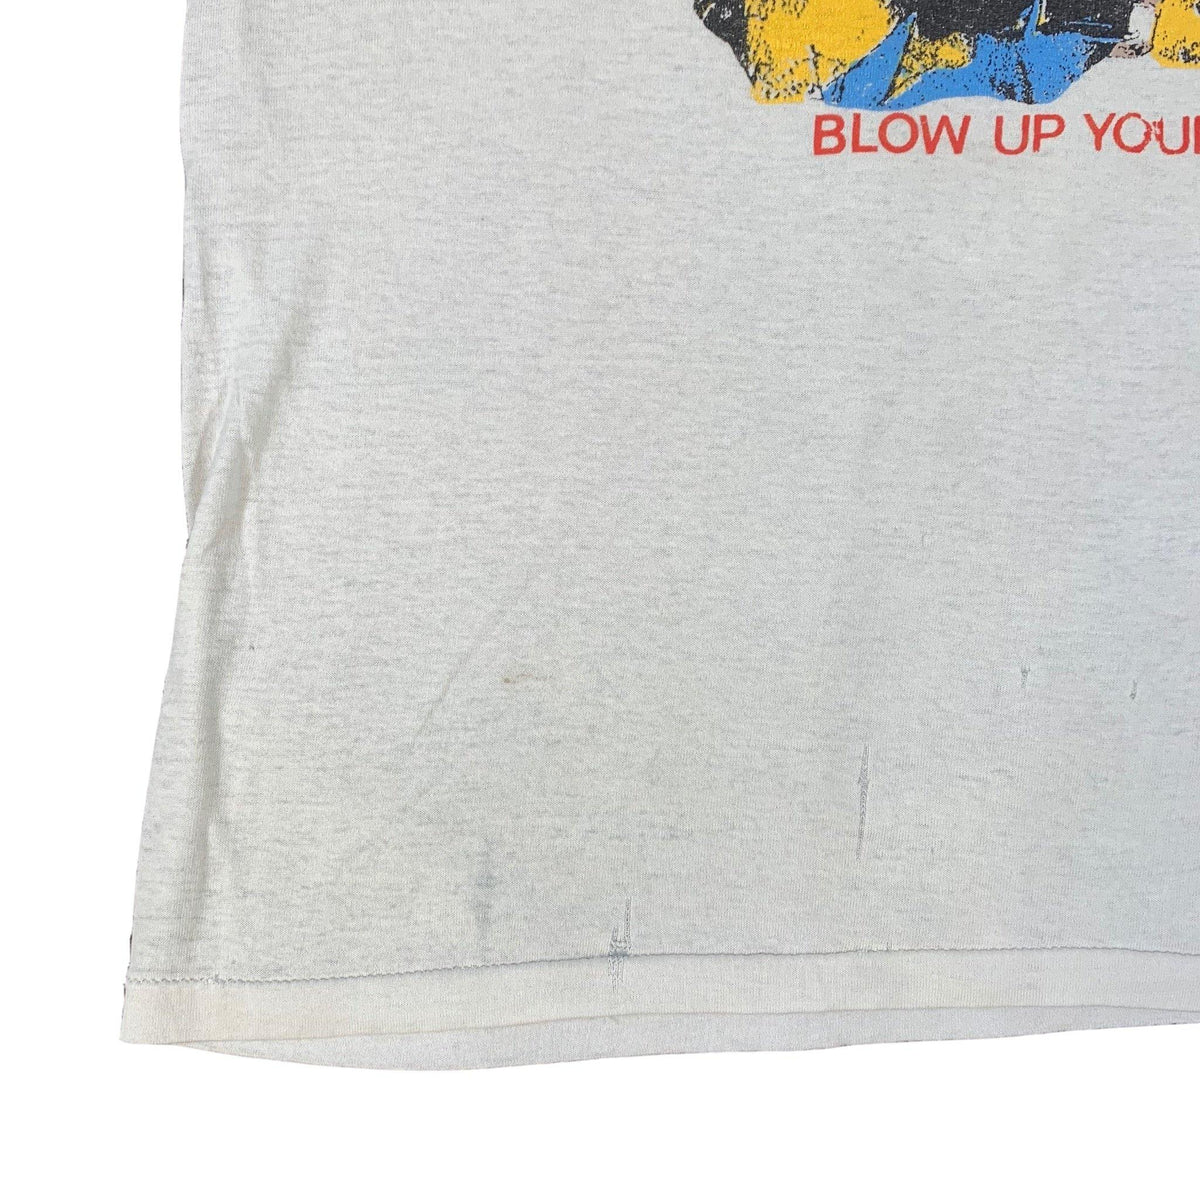 Vintage AC/DC Blow Up Your Video T Shirt bottom detail